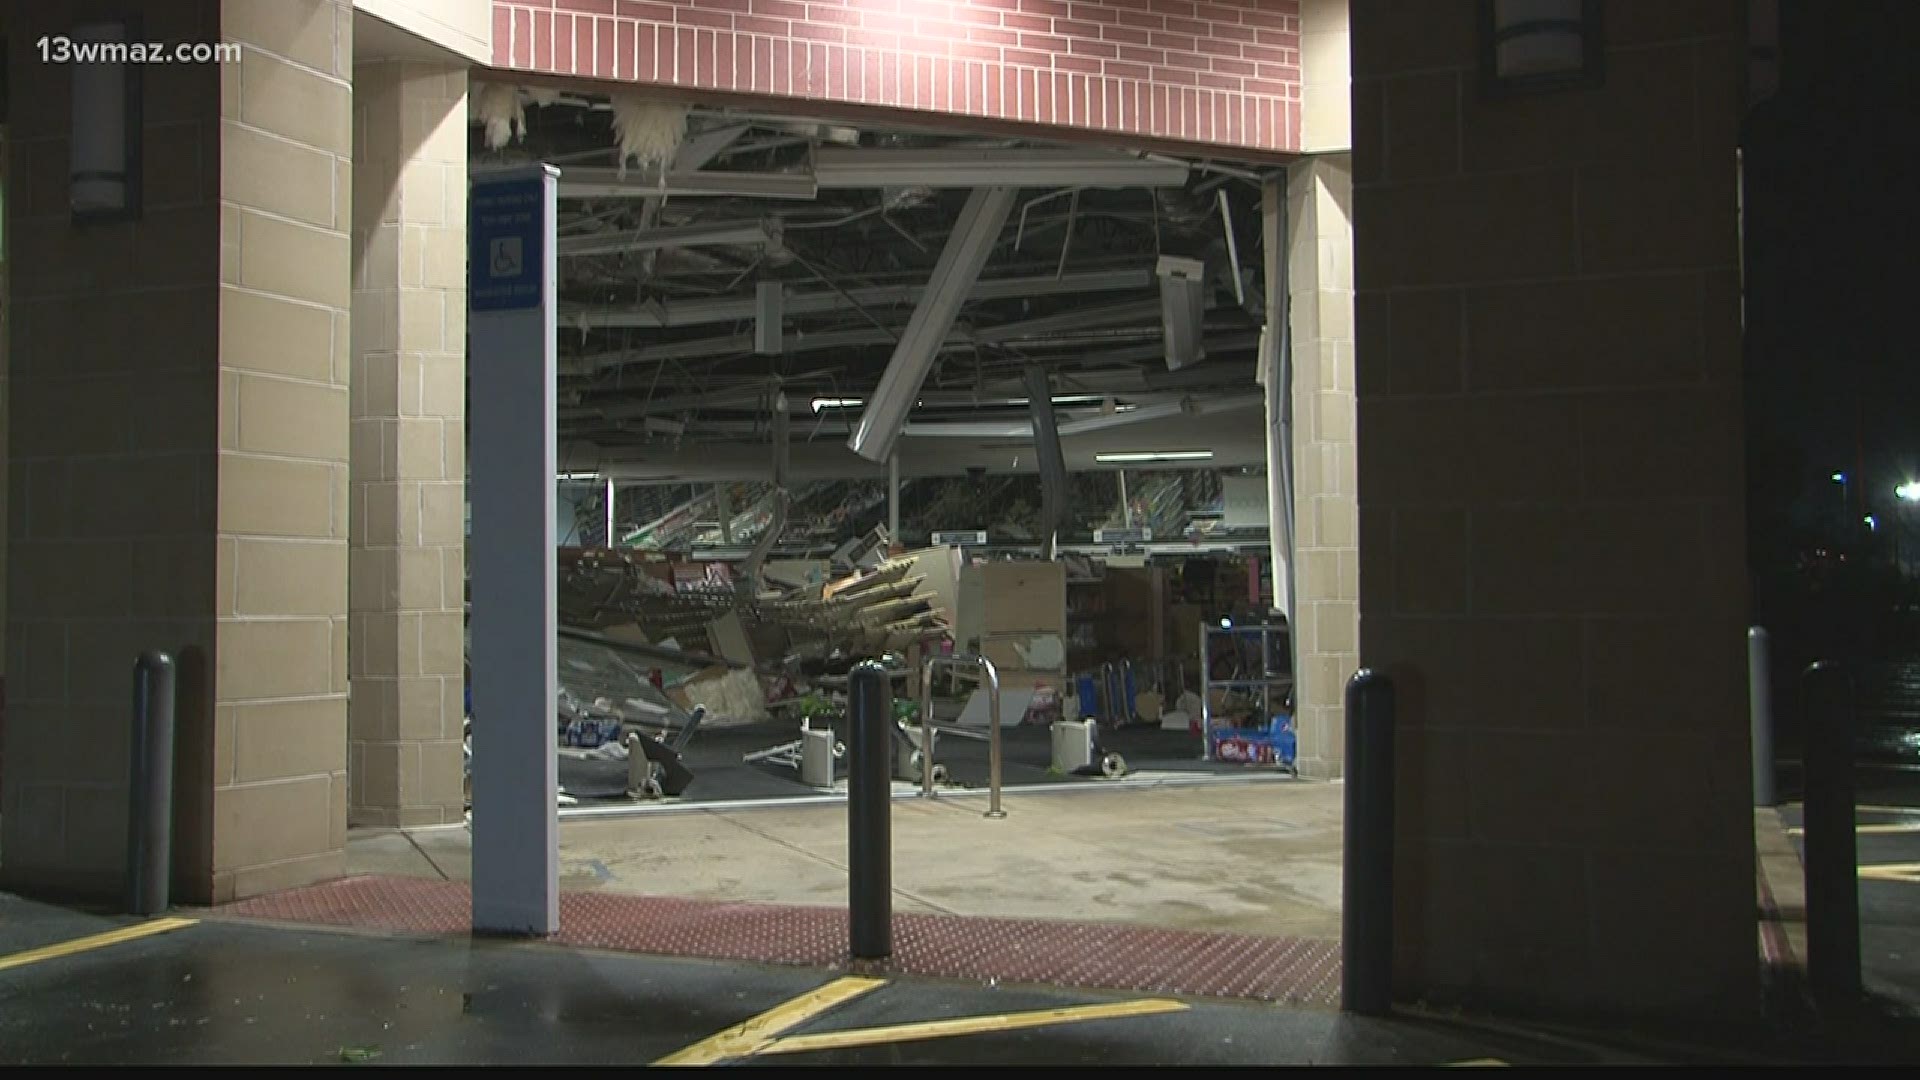 The Walmart and Walgreens on Zebulon Road took hits early Monday morning as severe storms rolled through. They closed for repairs.